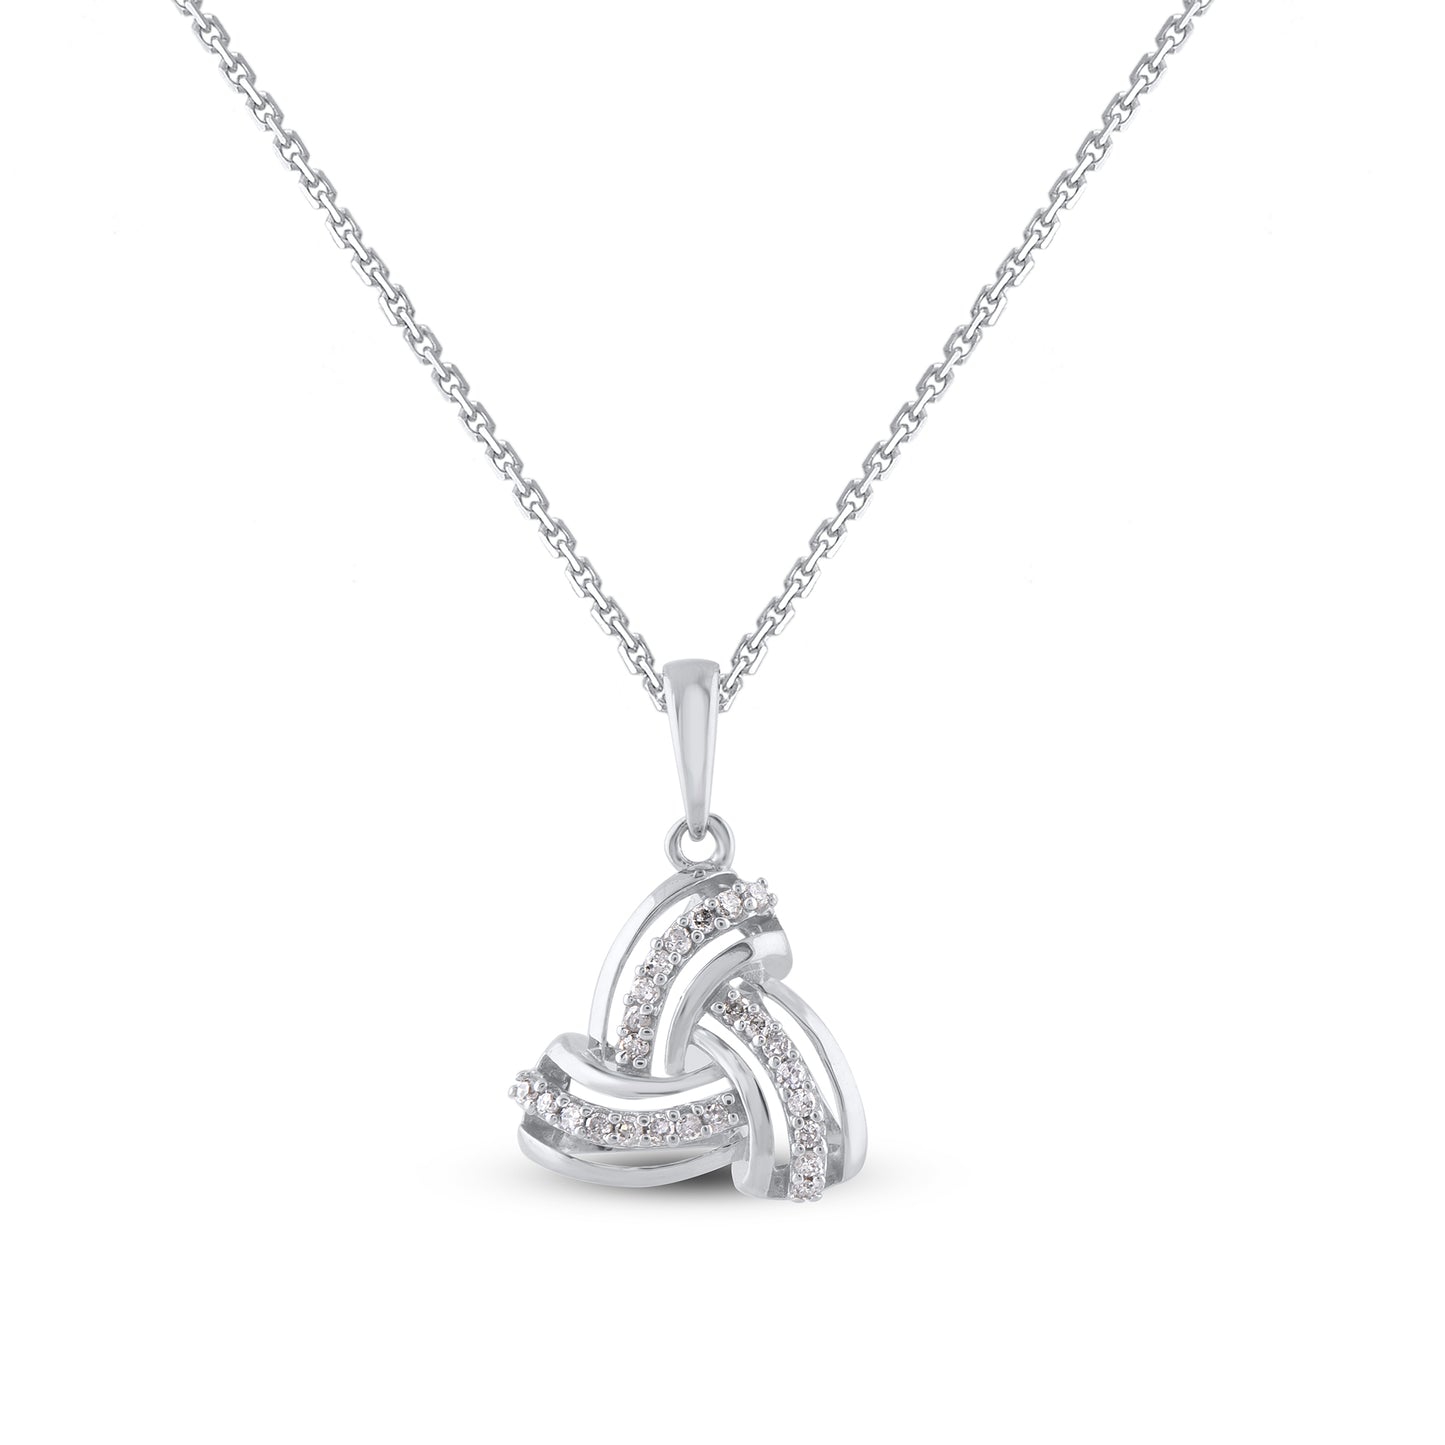 Swirl Triangle Pendant Necklace in 925 Sterling Silver